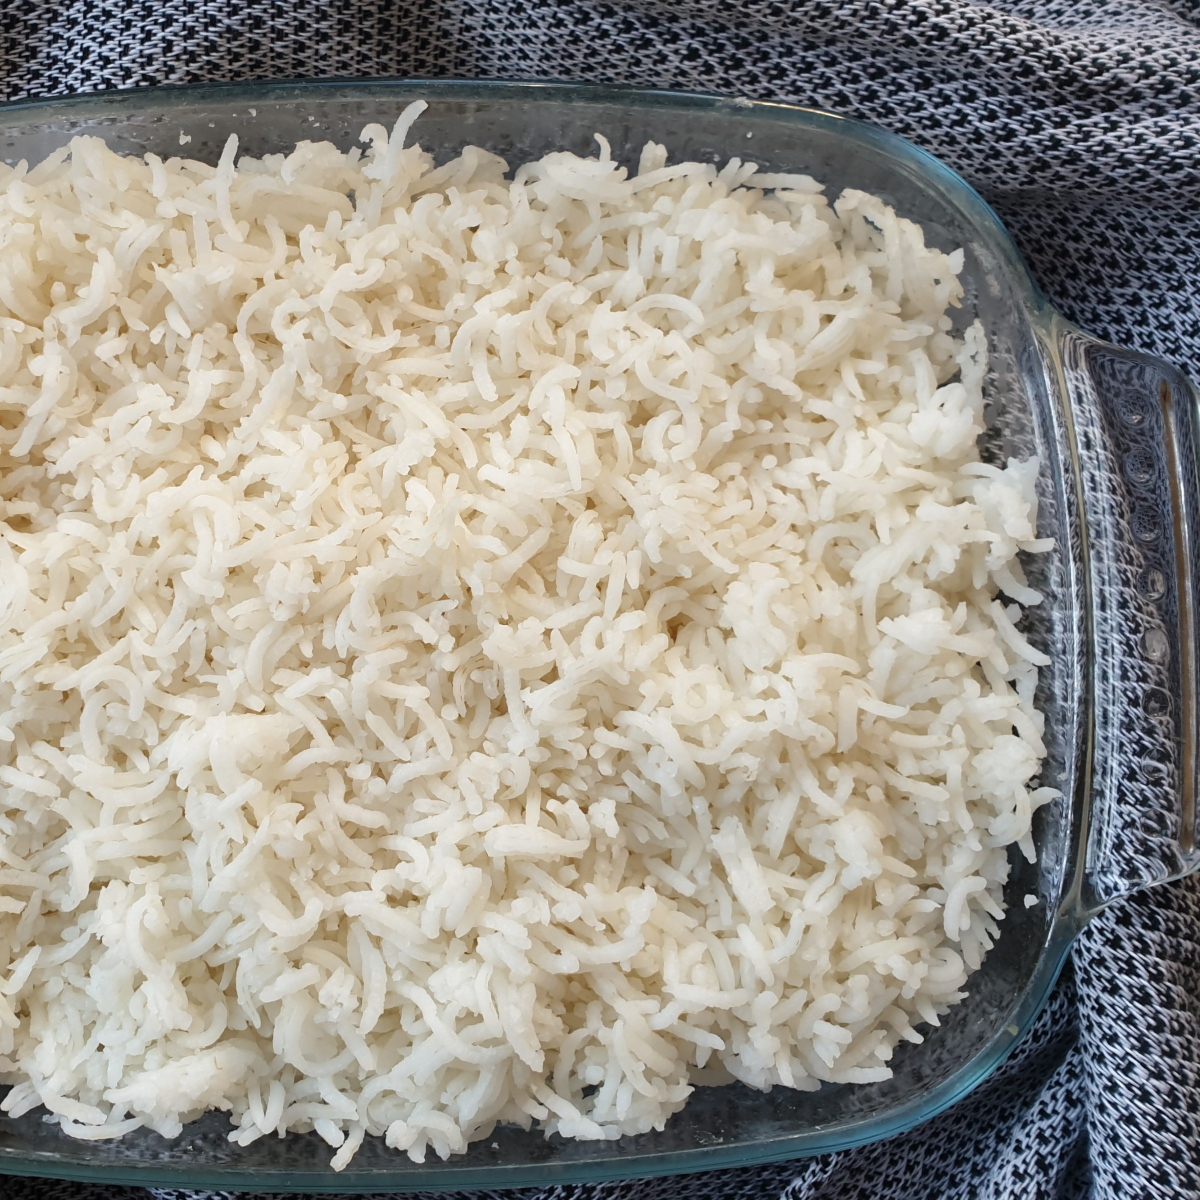 A dish of oven baked rice